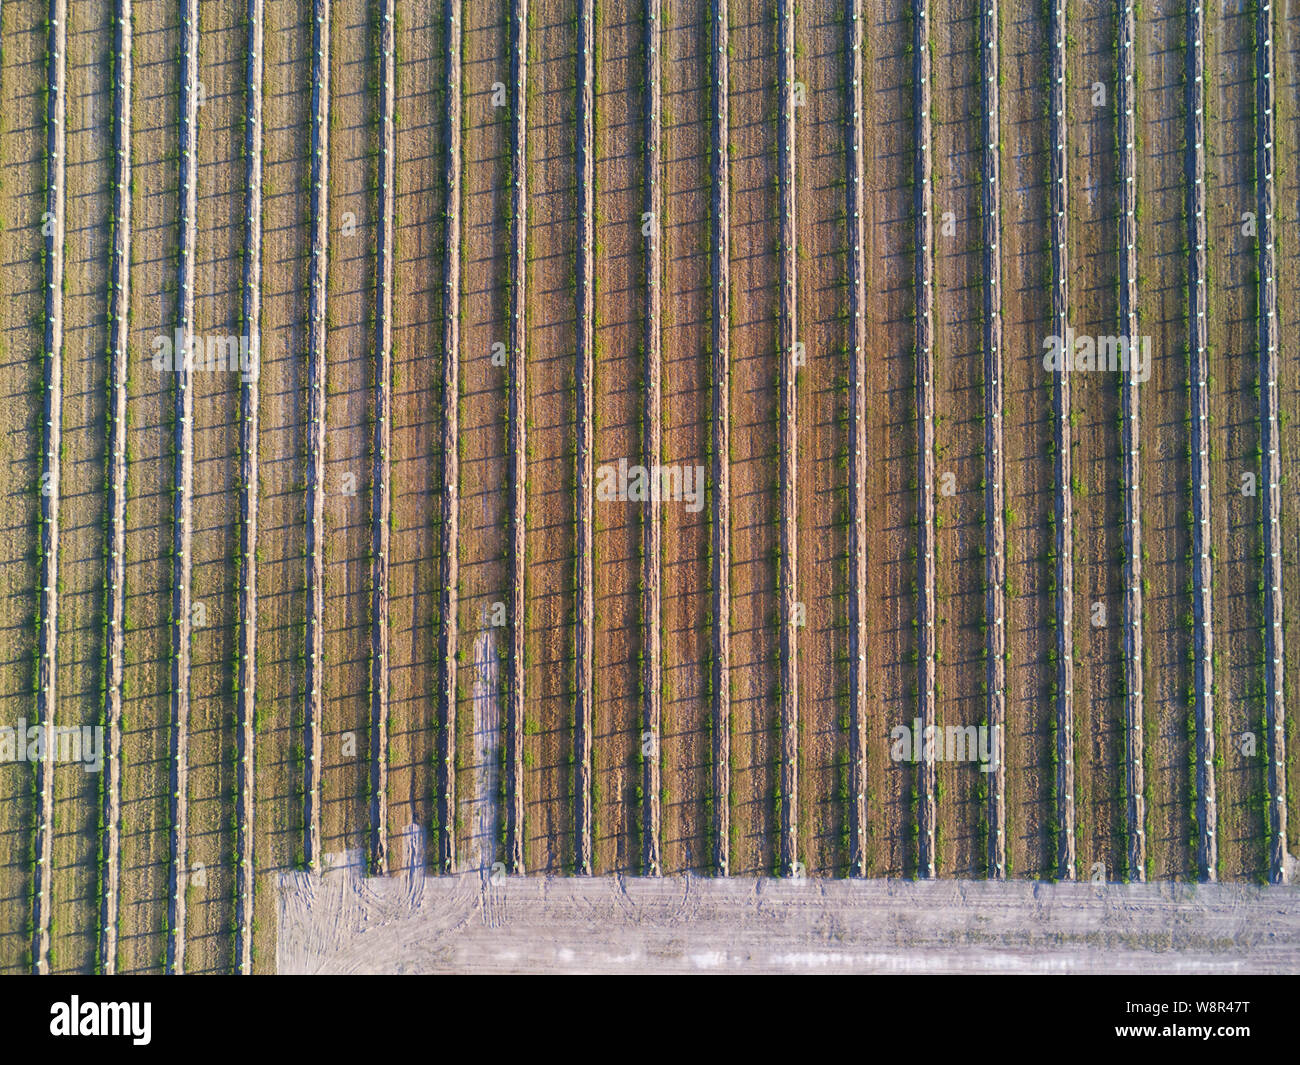 Aerial of the patterns of a newly planted macadamia nut plantation near Gin Gin Queensland Australia Stock Photo